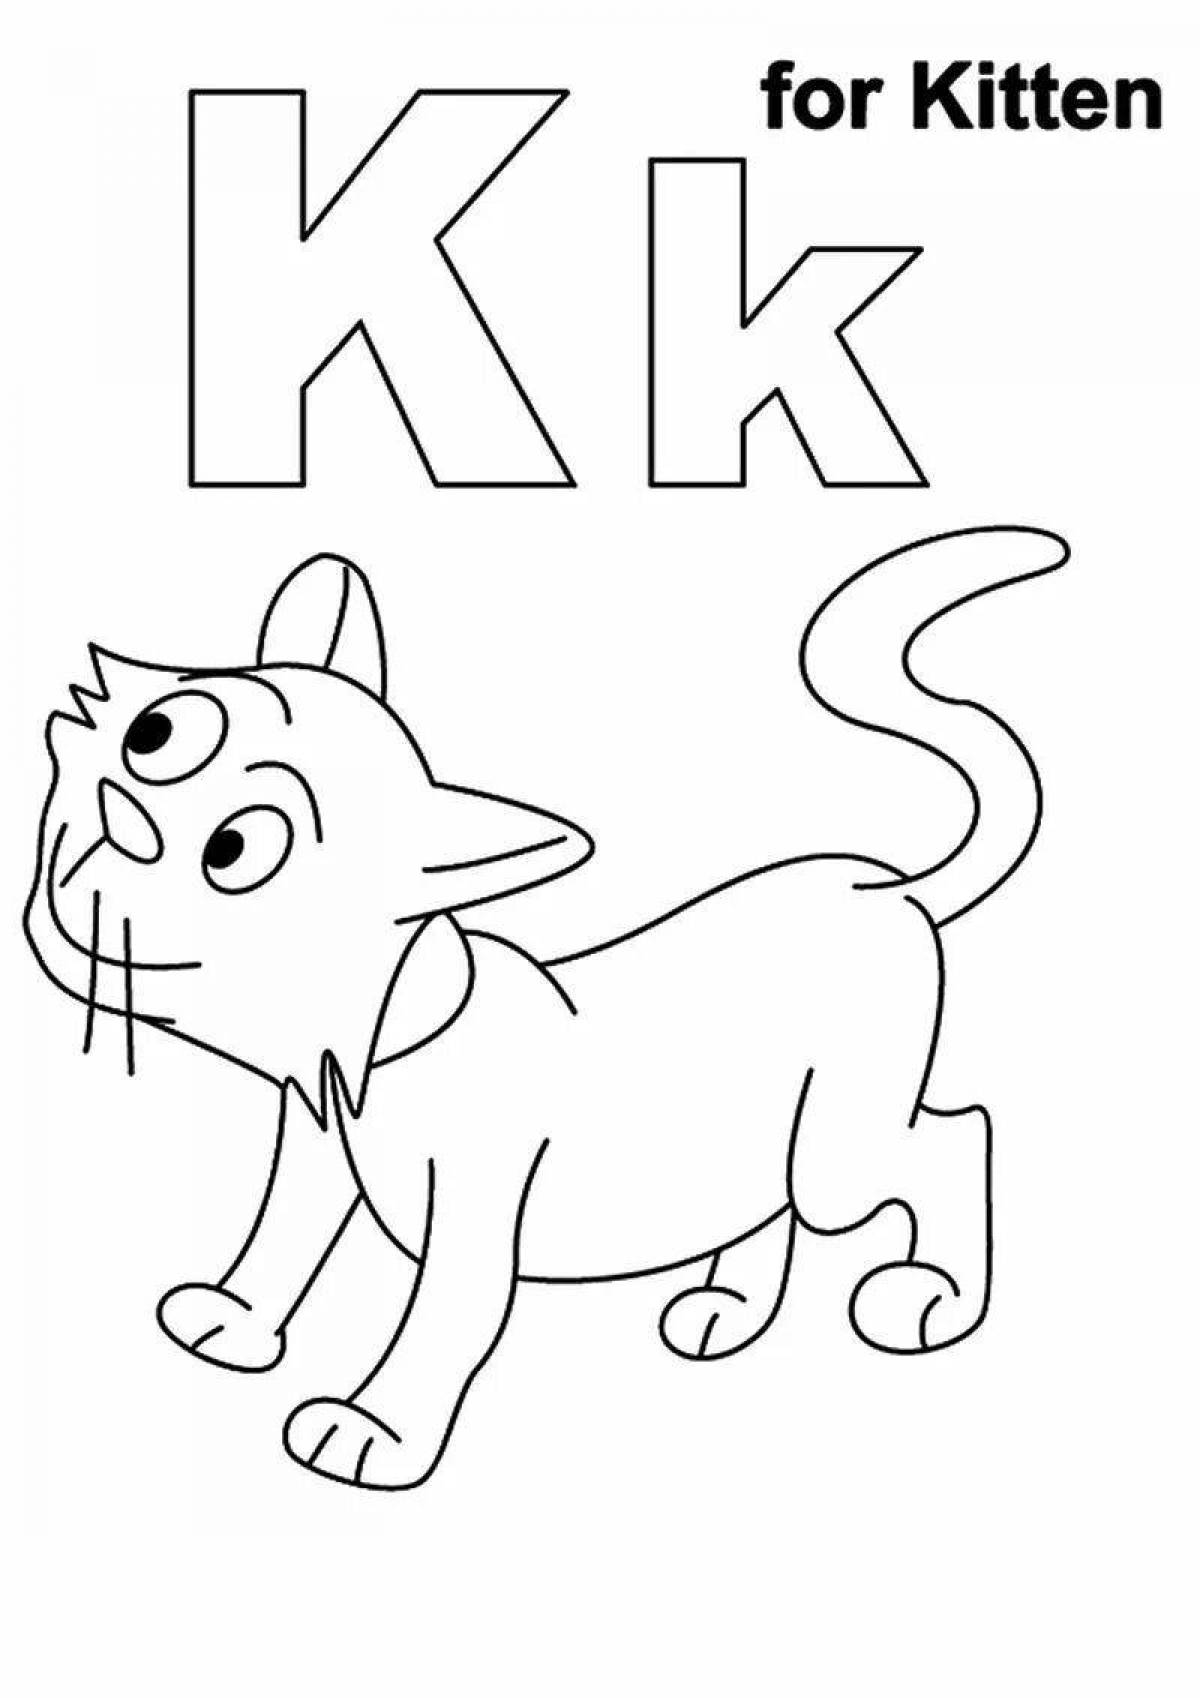 Glorious letter k coloring book